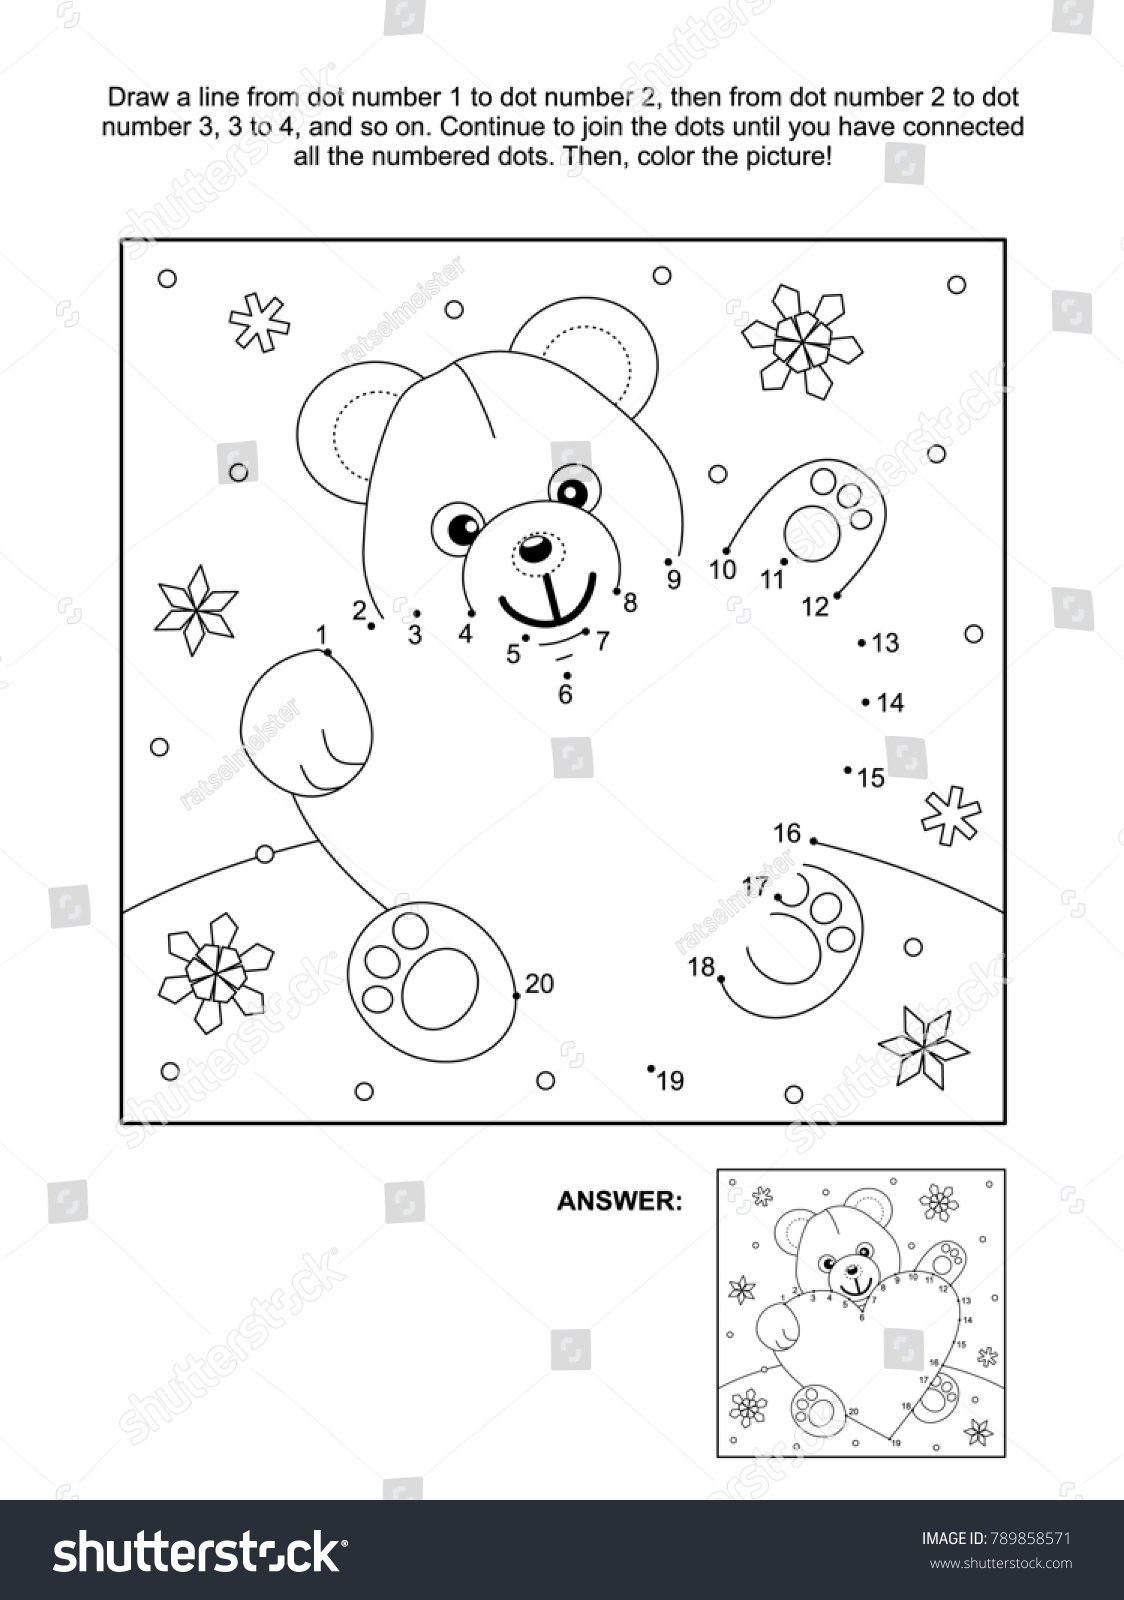 Valentine s Day themed connect the dots picture puzzle and coloring page with teddy bear and heart